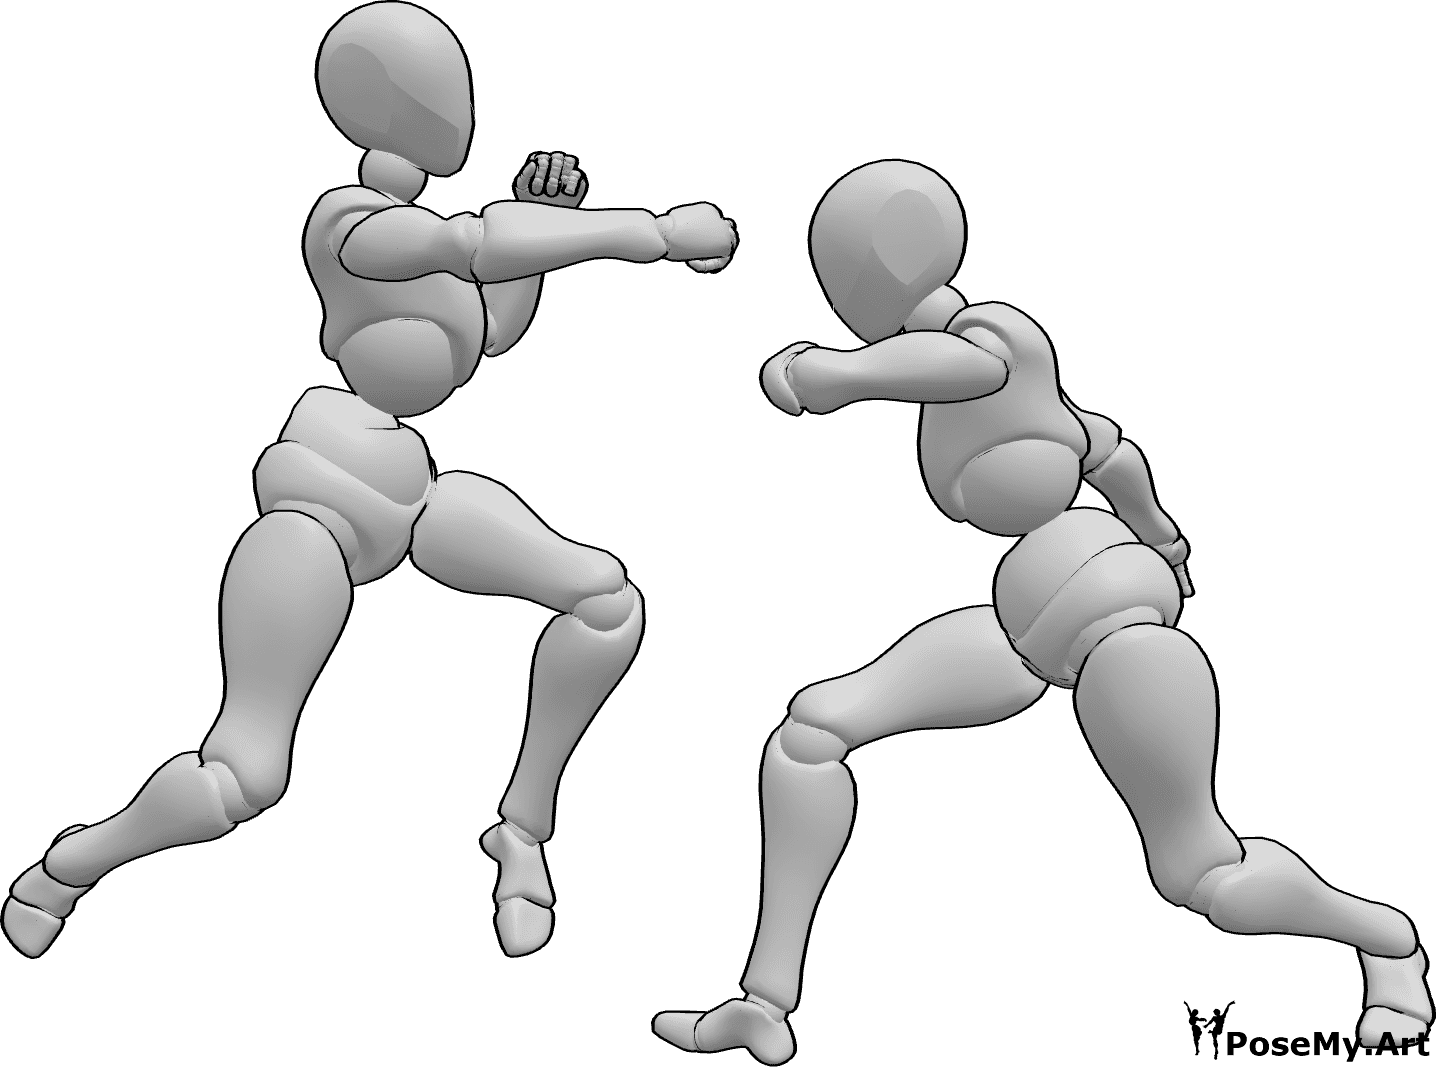 Pose Reference- Females fighting punch pose - Two females are fighting, one of them is jumping and punching